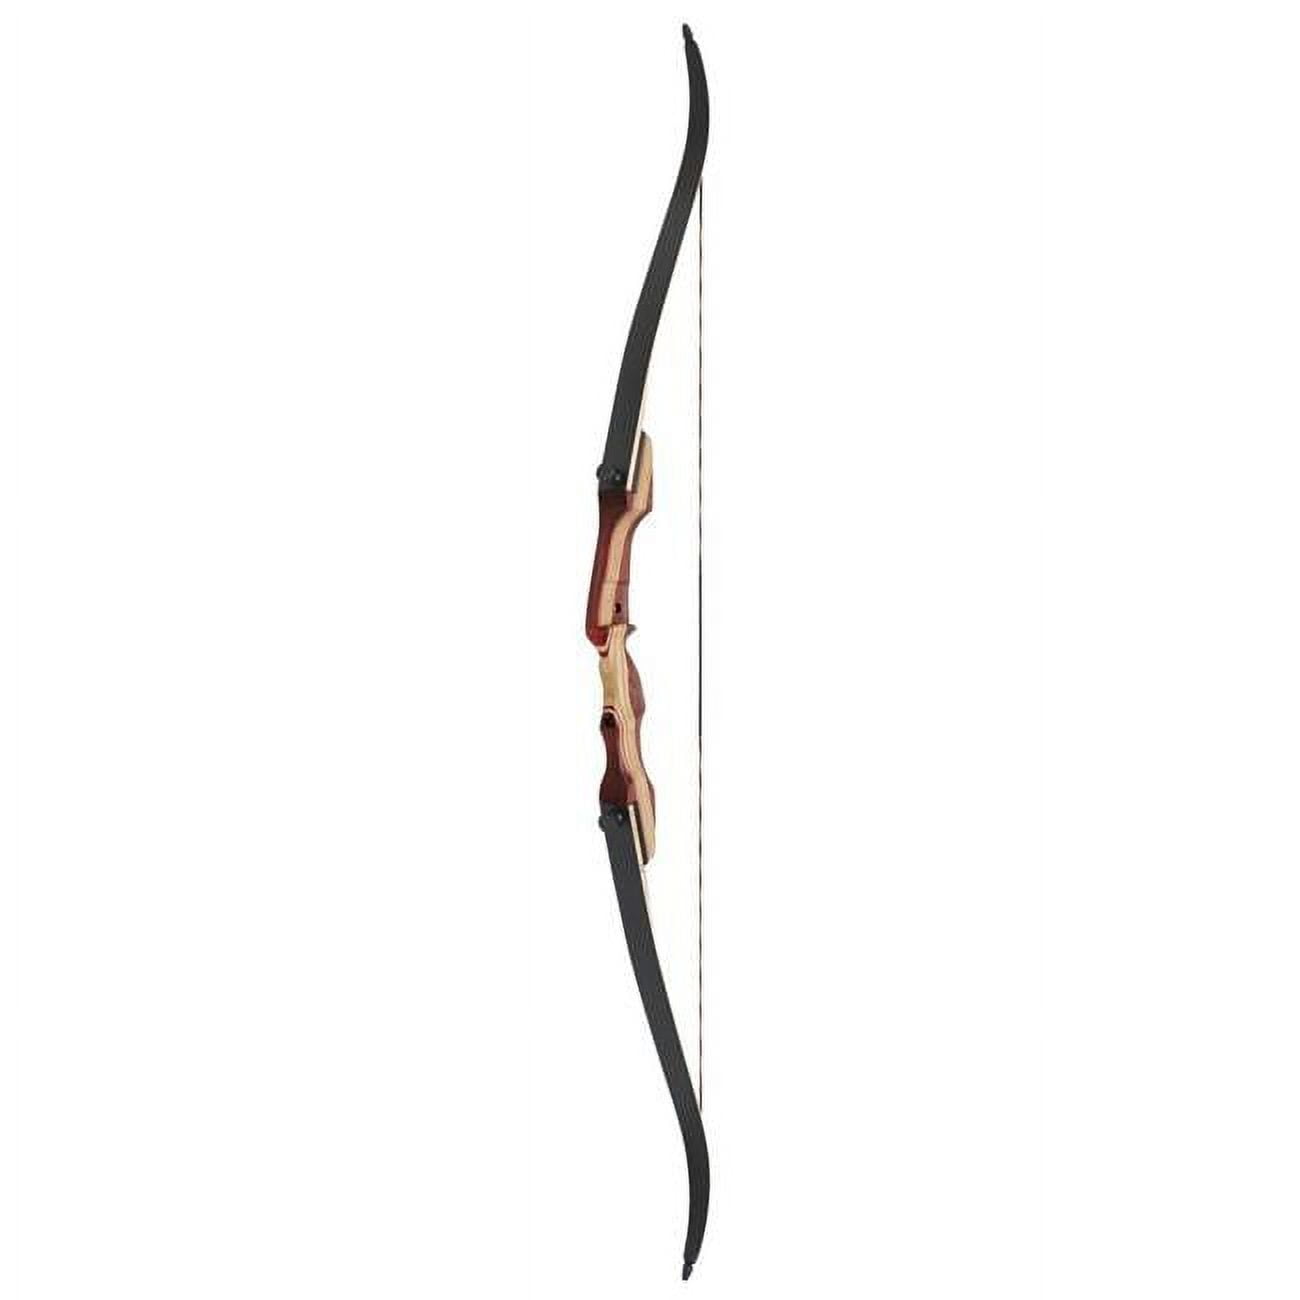 Sand Shark Recurve Bowfishing Bow by Fin-Finder 